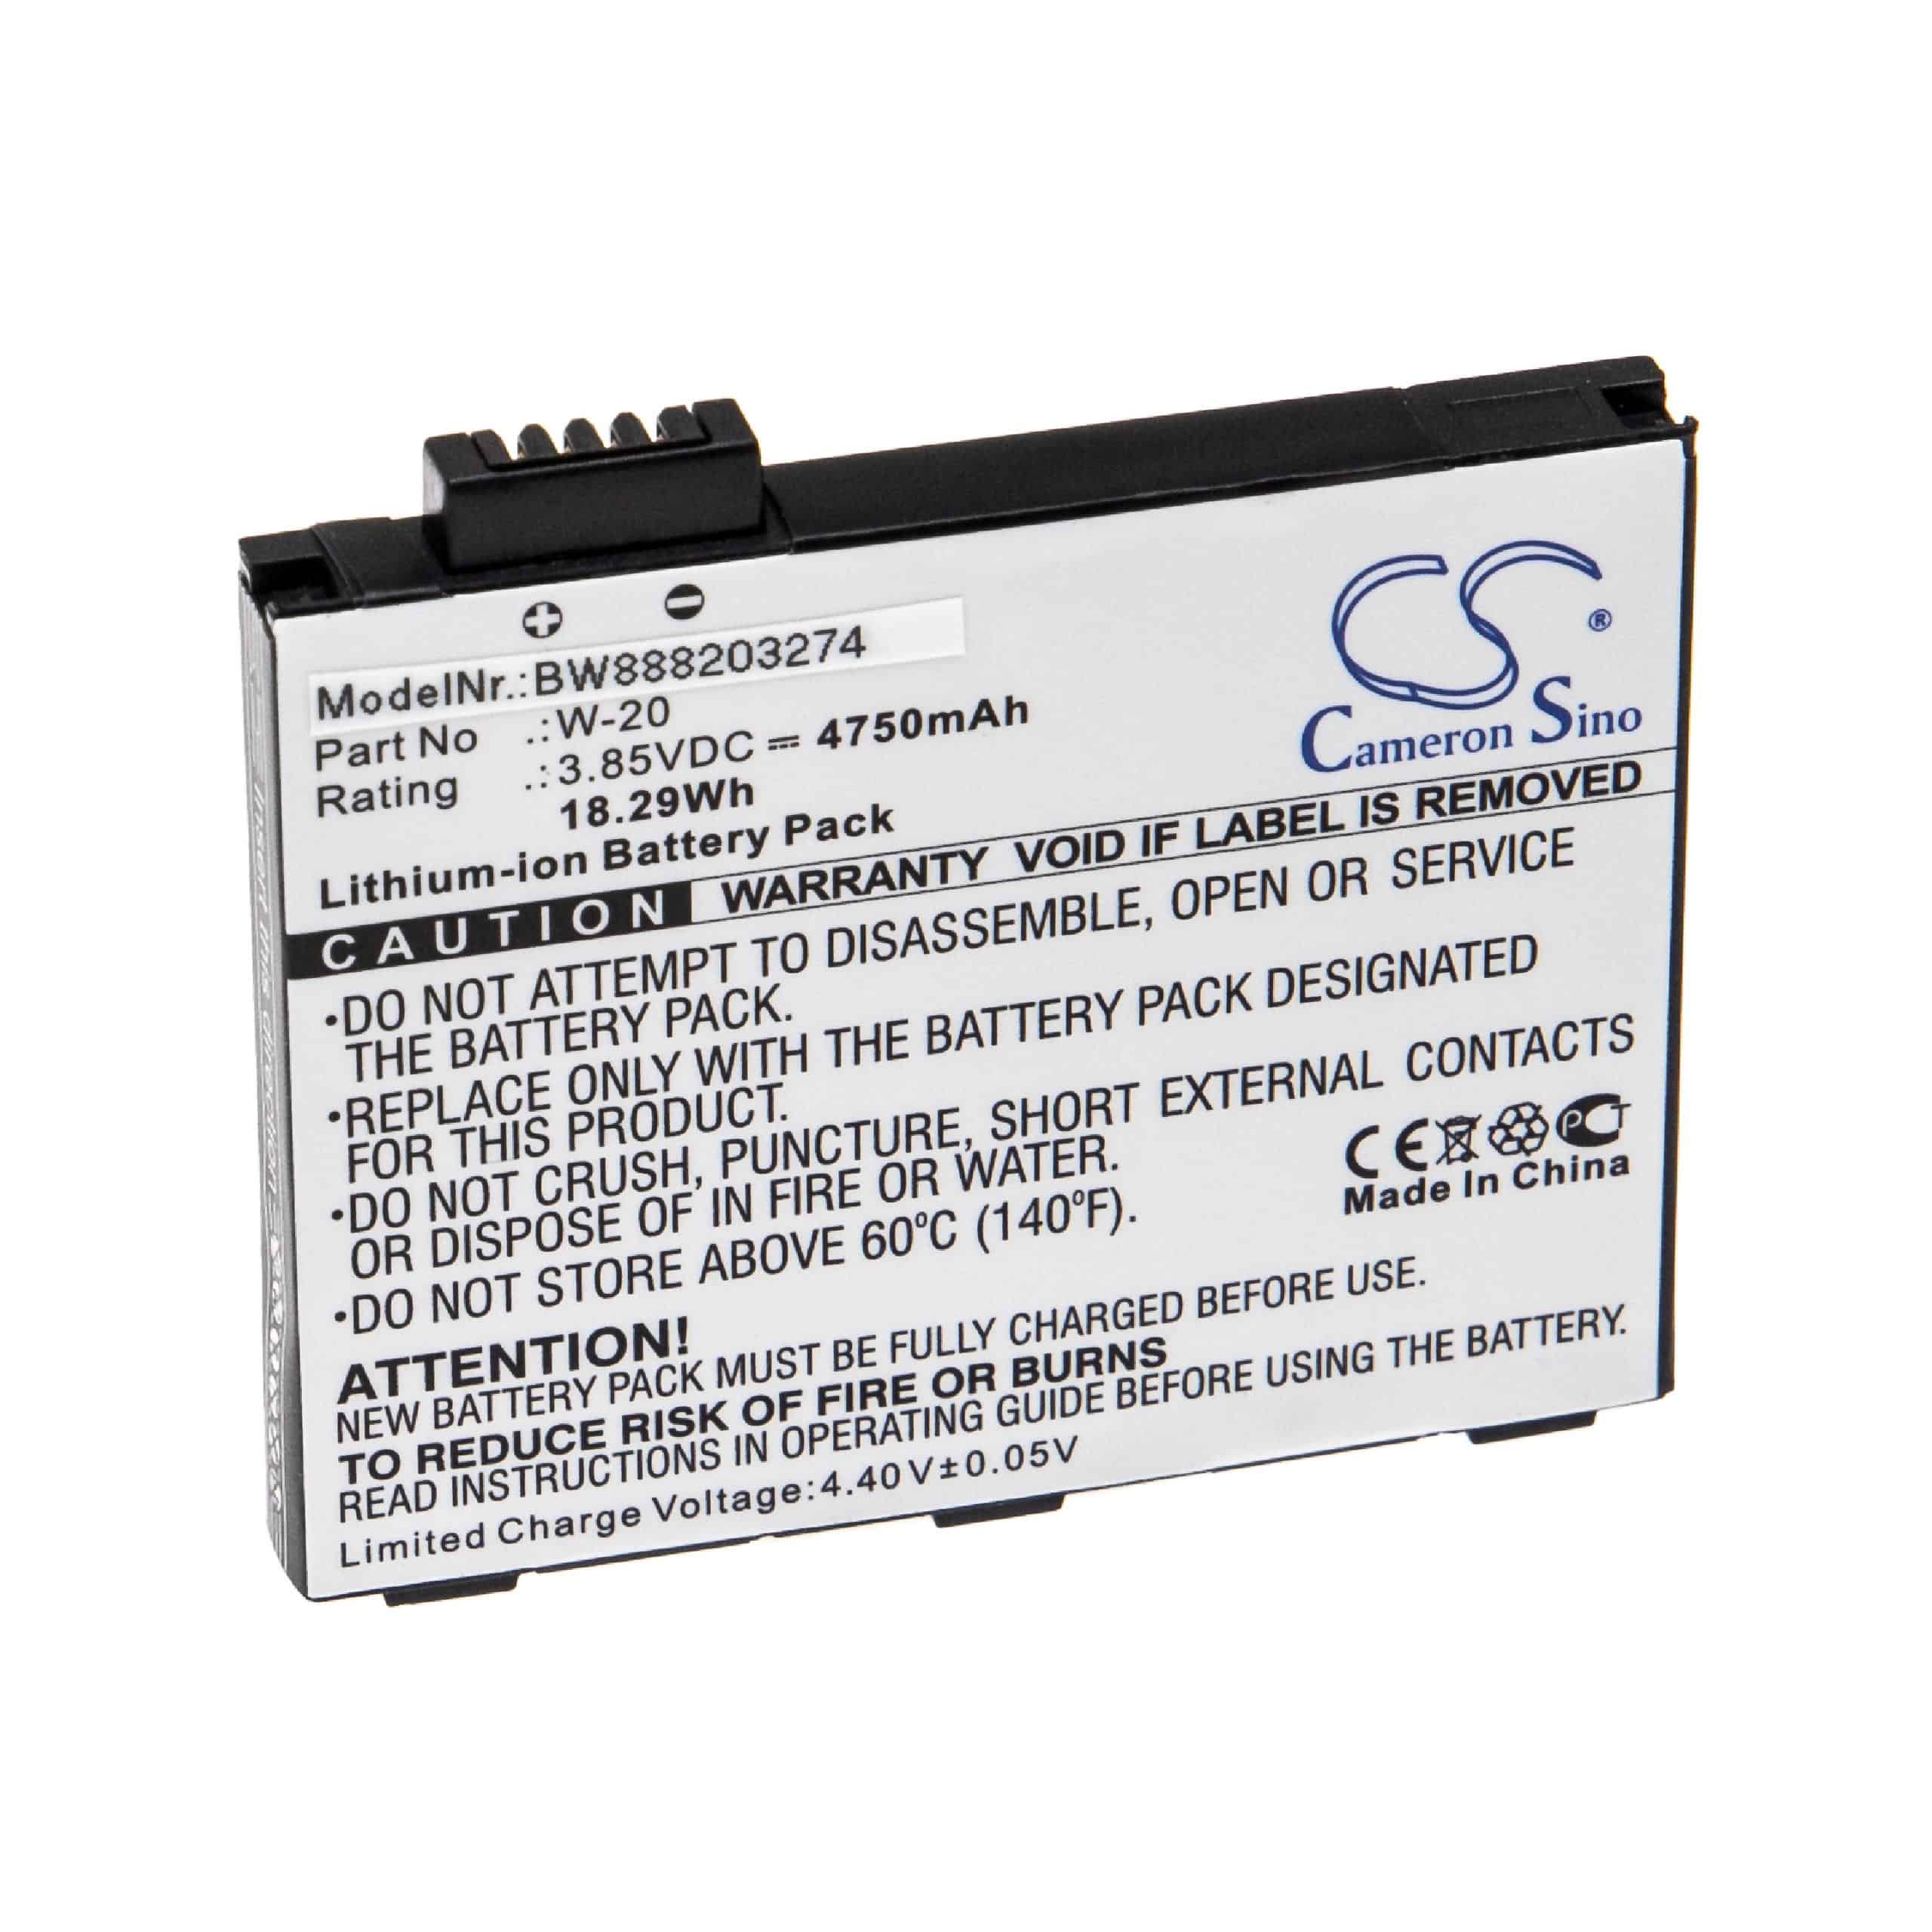 Mobile Router Battery Replacement for Netgear W-20, 308-10094-01 - 4750mAh 3.85V Li-Ion